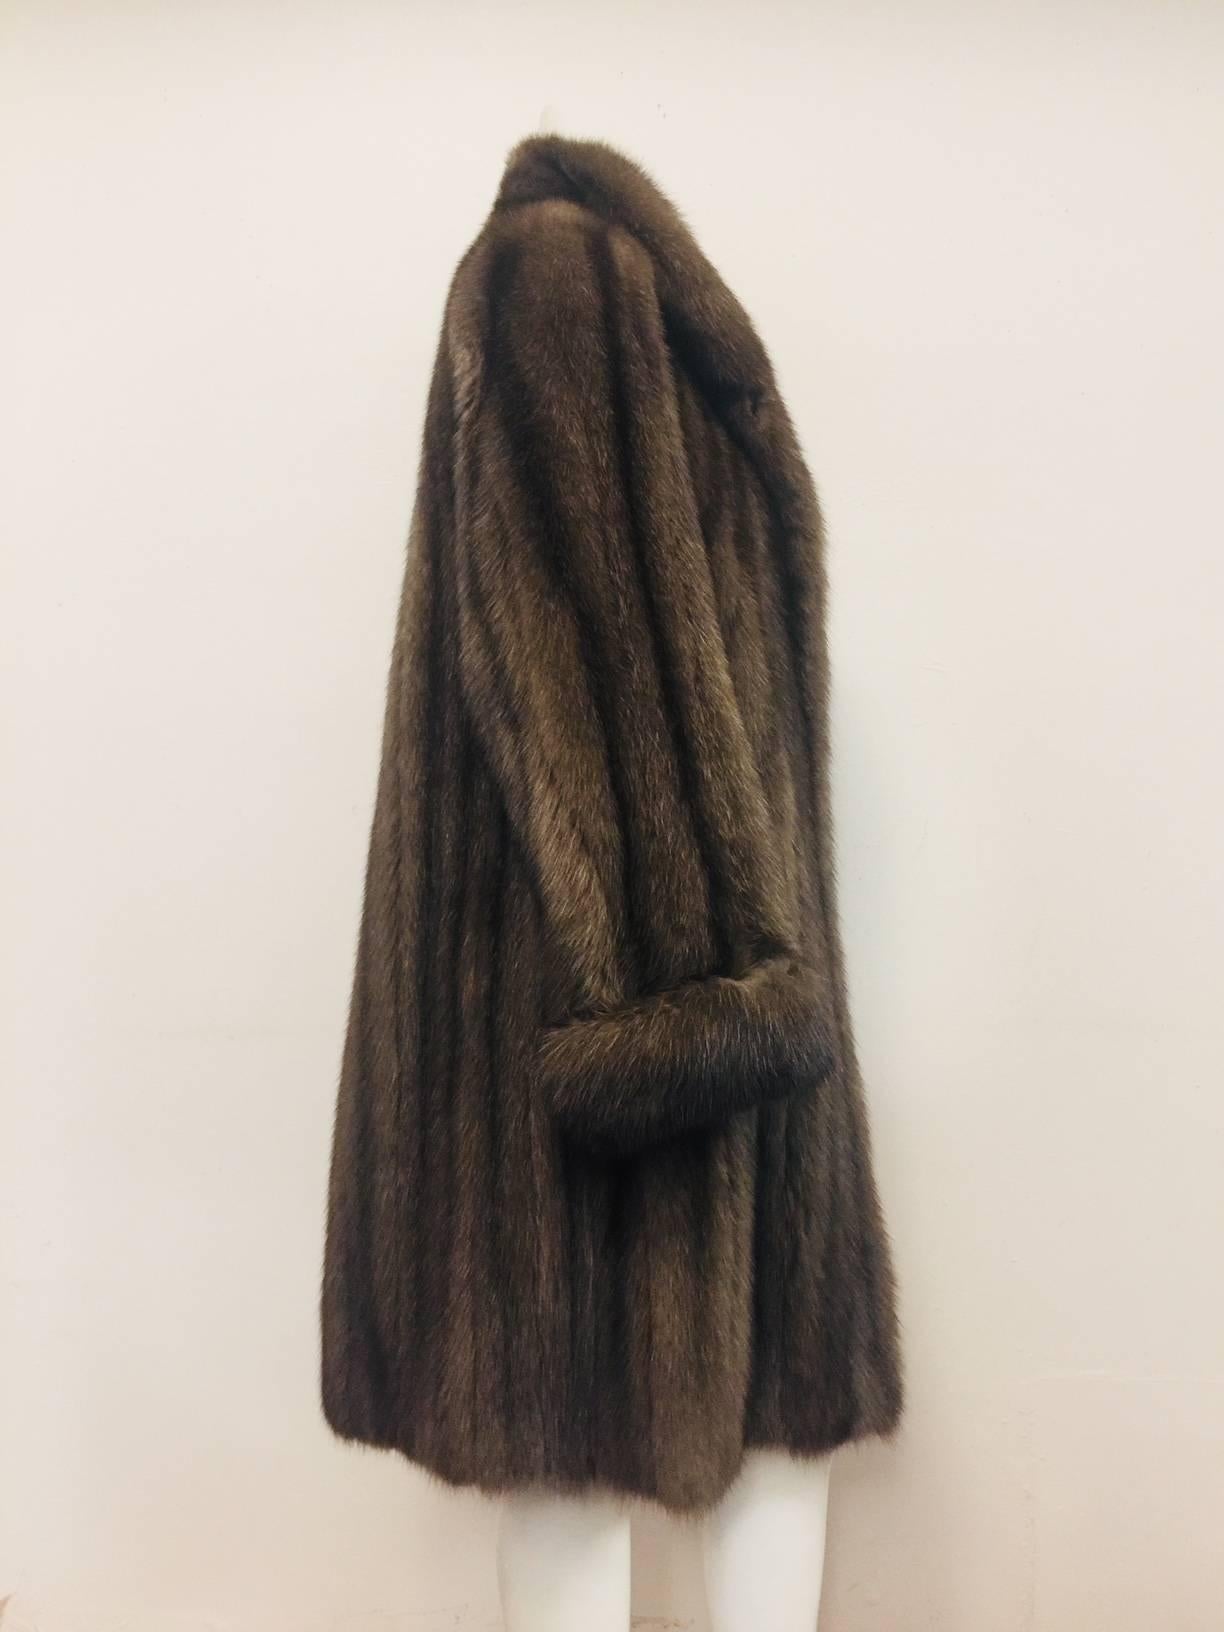 Magnificent Neiman Marcus Fur Short Coat is the ultimate in luxury!  Only the finest Russian Barguzin Imperial Sable would suffice.  Russian Sable - its reputation precedes itself!  Truly a must for any sophisticated fashionista during harsh winter